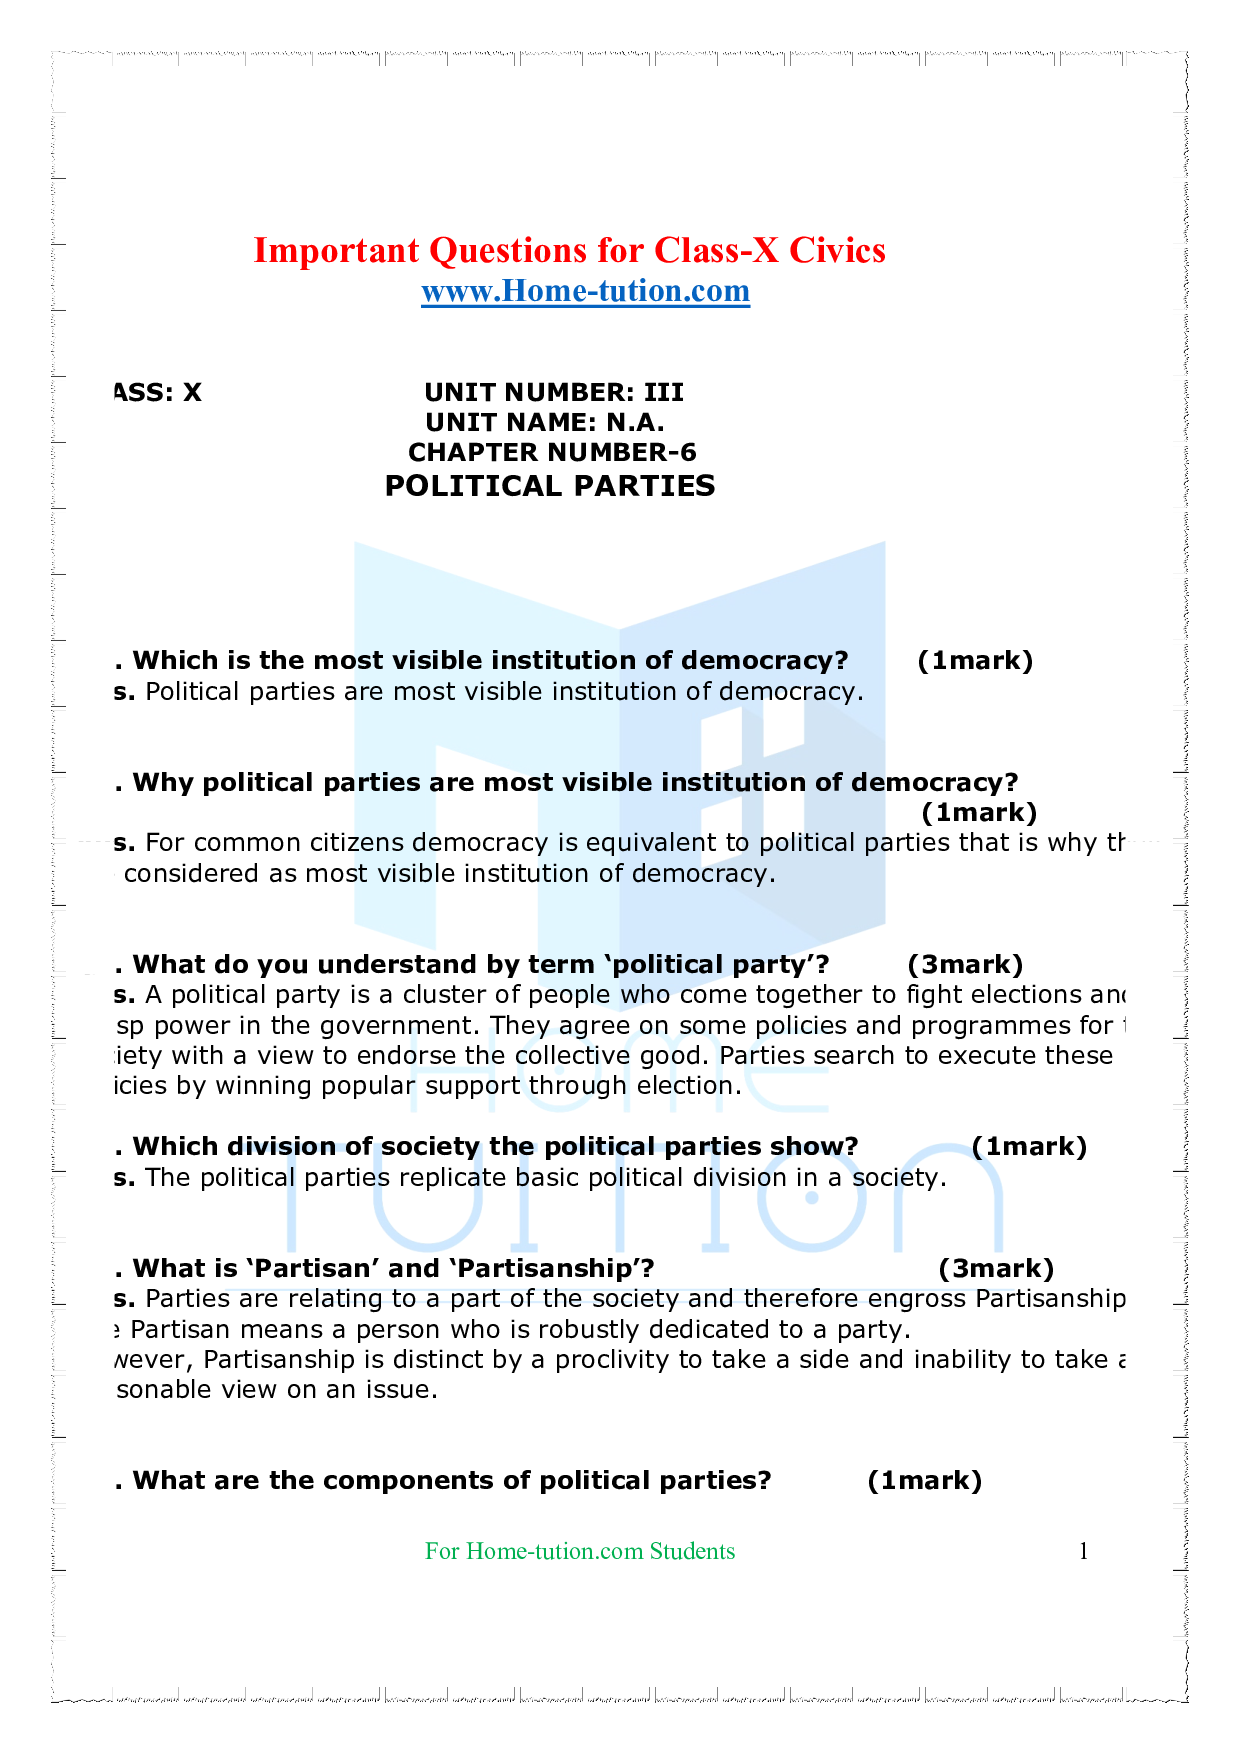 Chapter-6 Political Parties Questions